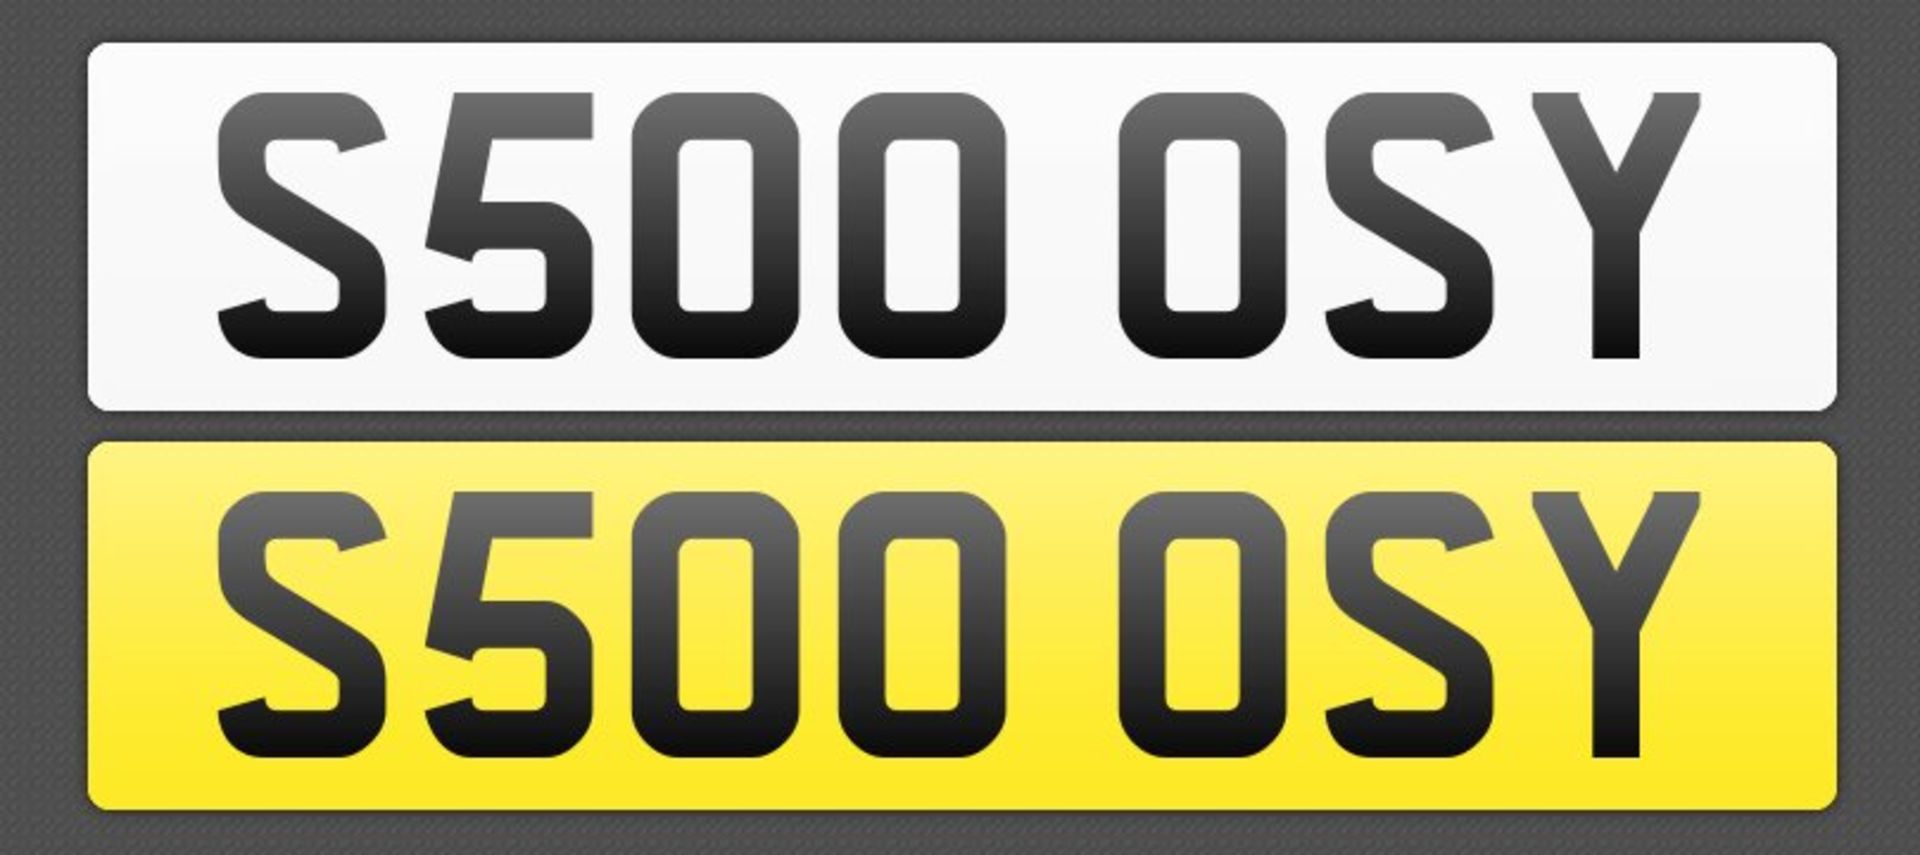 CHERISED NUMBER PLATE S500 0SY RETENTION CERTIFICATE